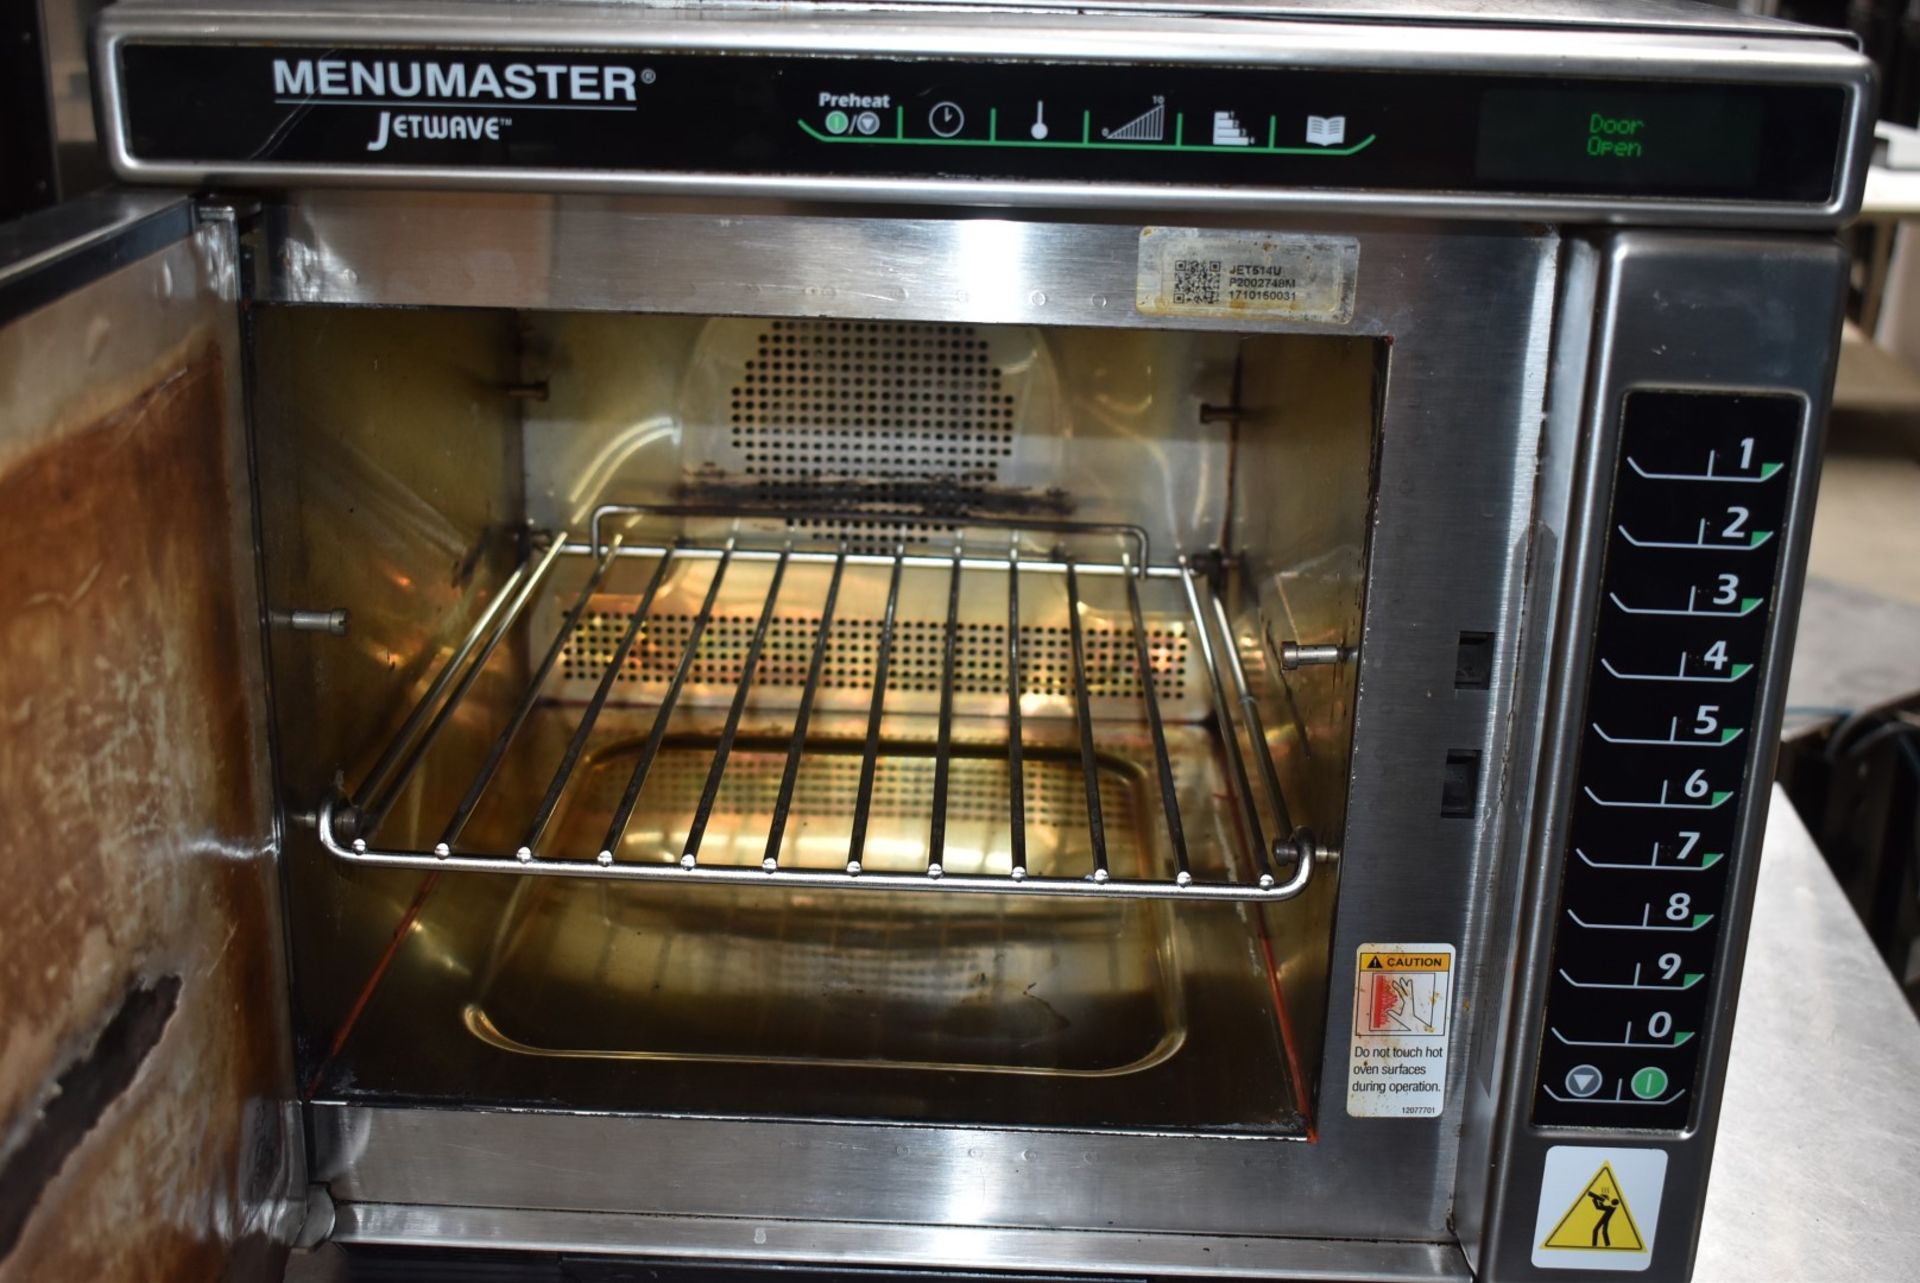 1 x Menumaster Jetwave JET514U High Speed Combination Microwave Oven - RRP £2,400 - Manufacture - Image 9 of 11